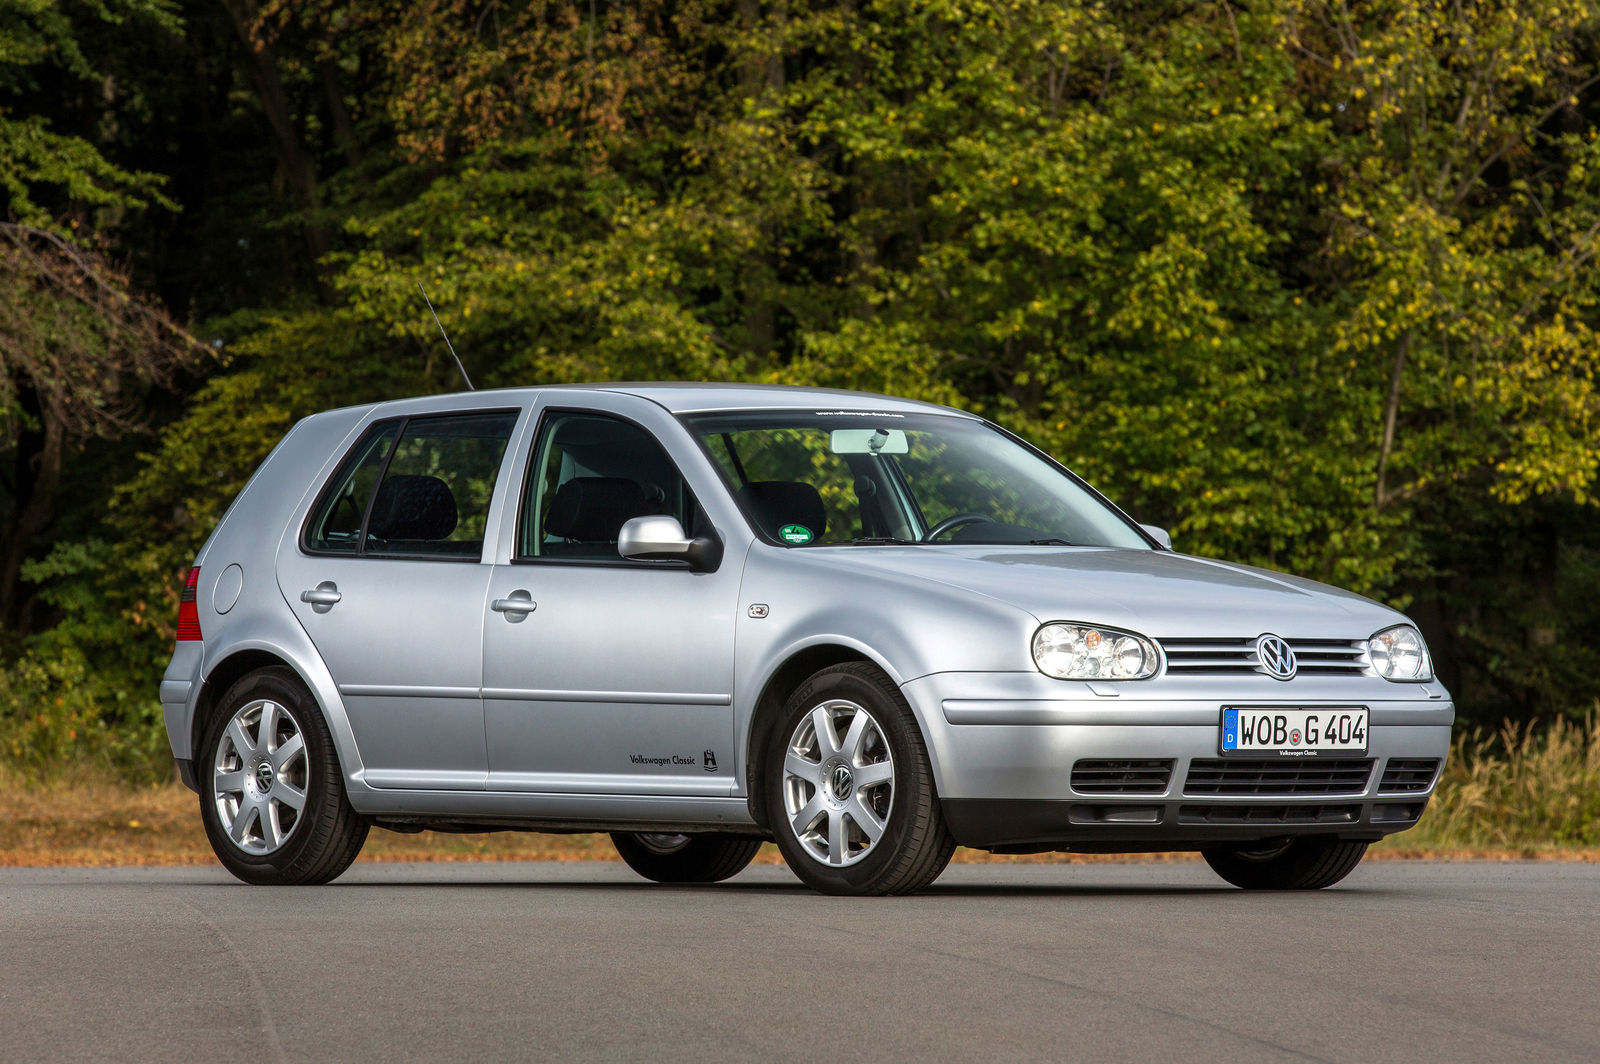 The icon of tomorrow: Golf IV – 1997 to 2003